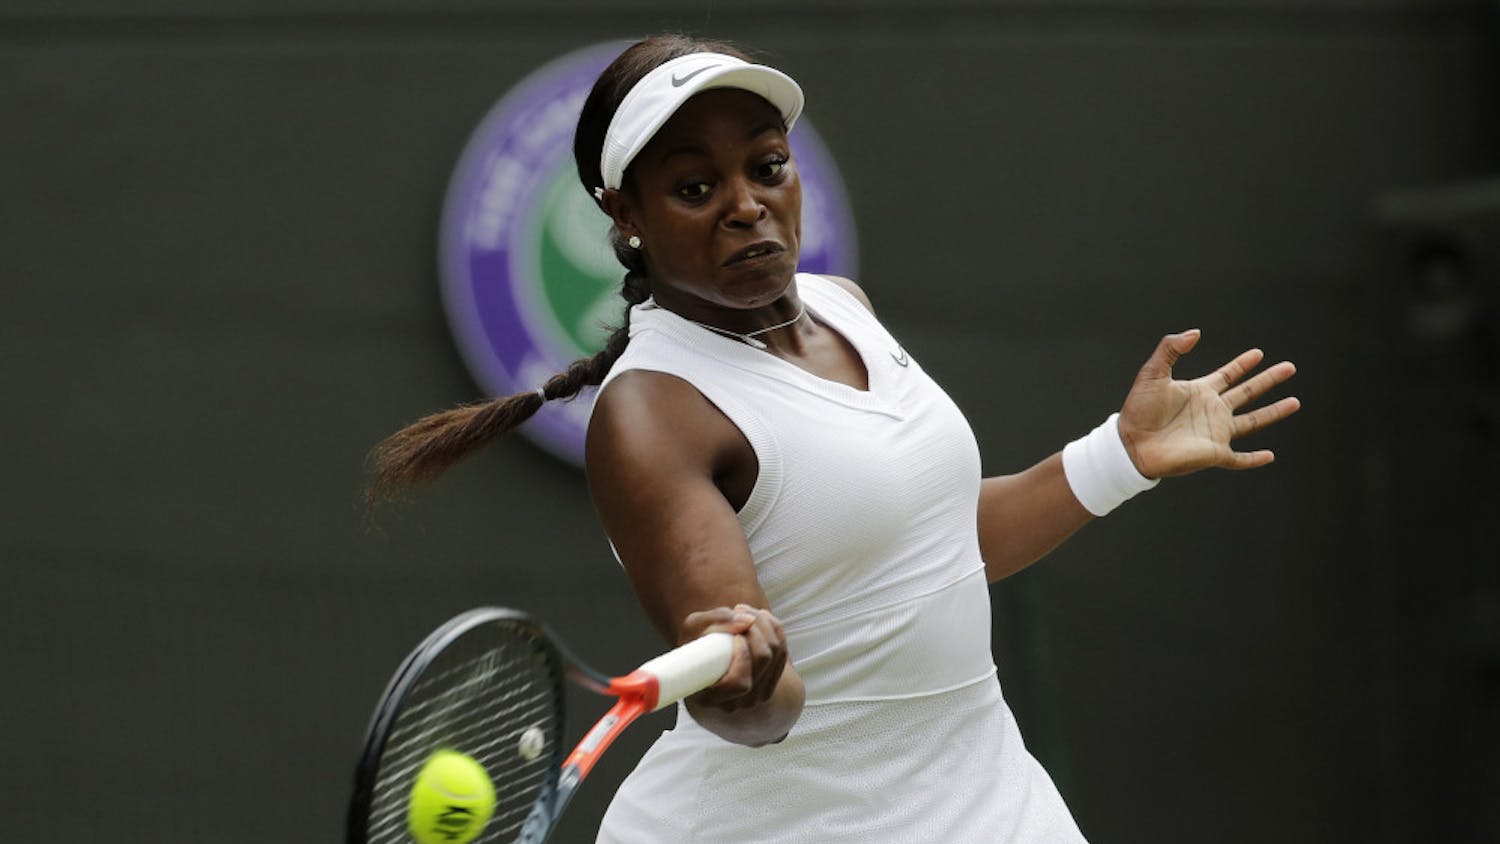 FILE - In this July 6, 2019, file photo, Sloane Stephens returns to Britain's Johanna Konta in a women's singles match at the Wimbledon Tennis Championships in London. Any World TeamTennis player or coach who tests positive for COVID-19 when arriving for the three-week 2020 season will be dropped from the league without pay. The health plan released Tuesday, June 16, 2020, by the WTT for its matches starting July 12 at The Greenbrier in West Virginia also calls for two daily temperature checks for spectators, no ball kids, a chair umpire aided by electronic line-calling instead of line judges, and no high-fives or handshakes between opponents. The rosters announced for the WTT's nine teams include Grand Slam title winners Kim Clijsters, Sloane Stephens, Sofia Kenin and the Bryan brothers. (AP Photo/Ben Curtis, File)